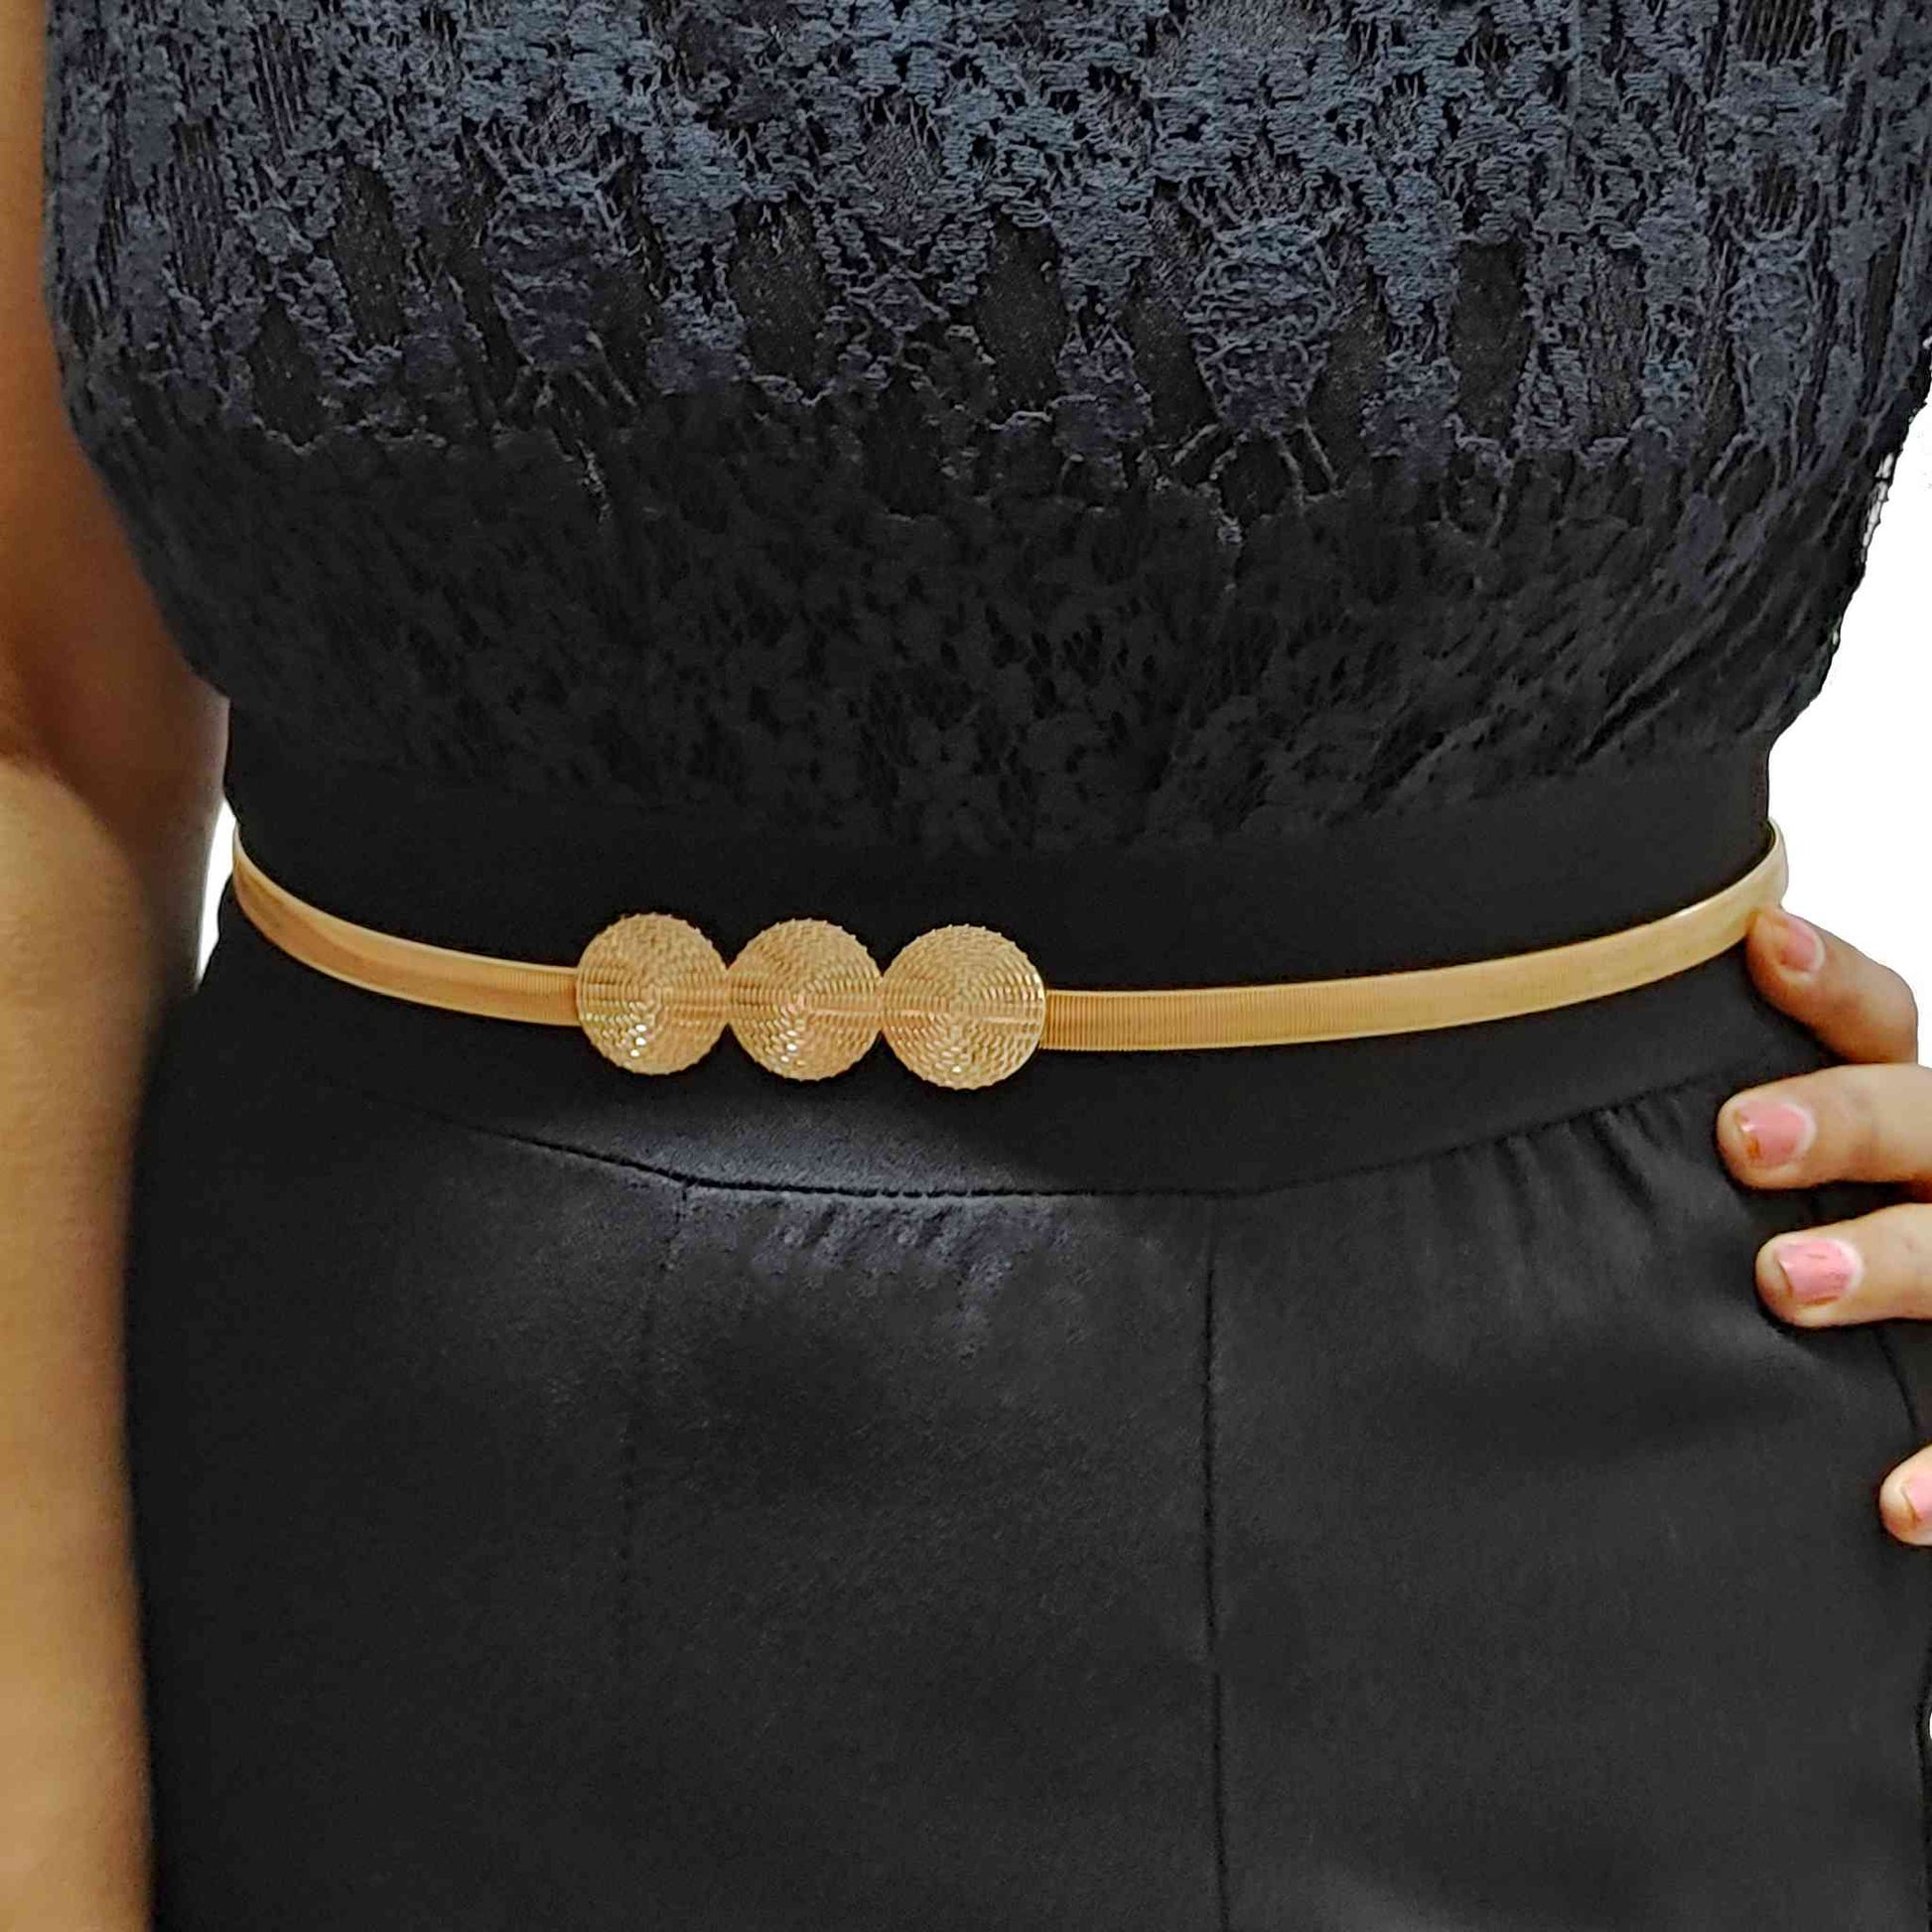 Stylish Fancy Stretchable Metal Party Belt For Girls, Women, Gold